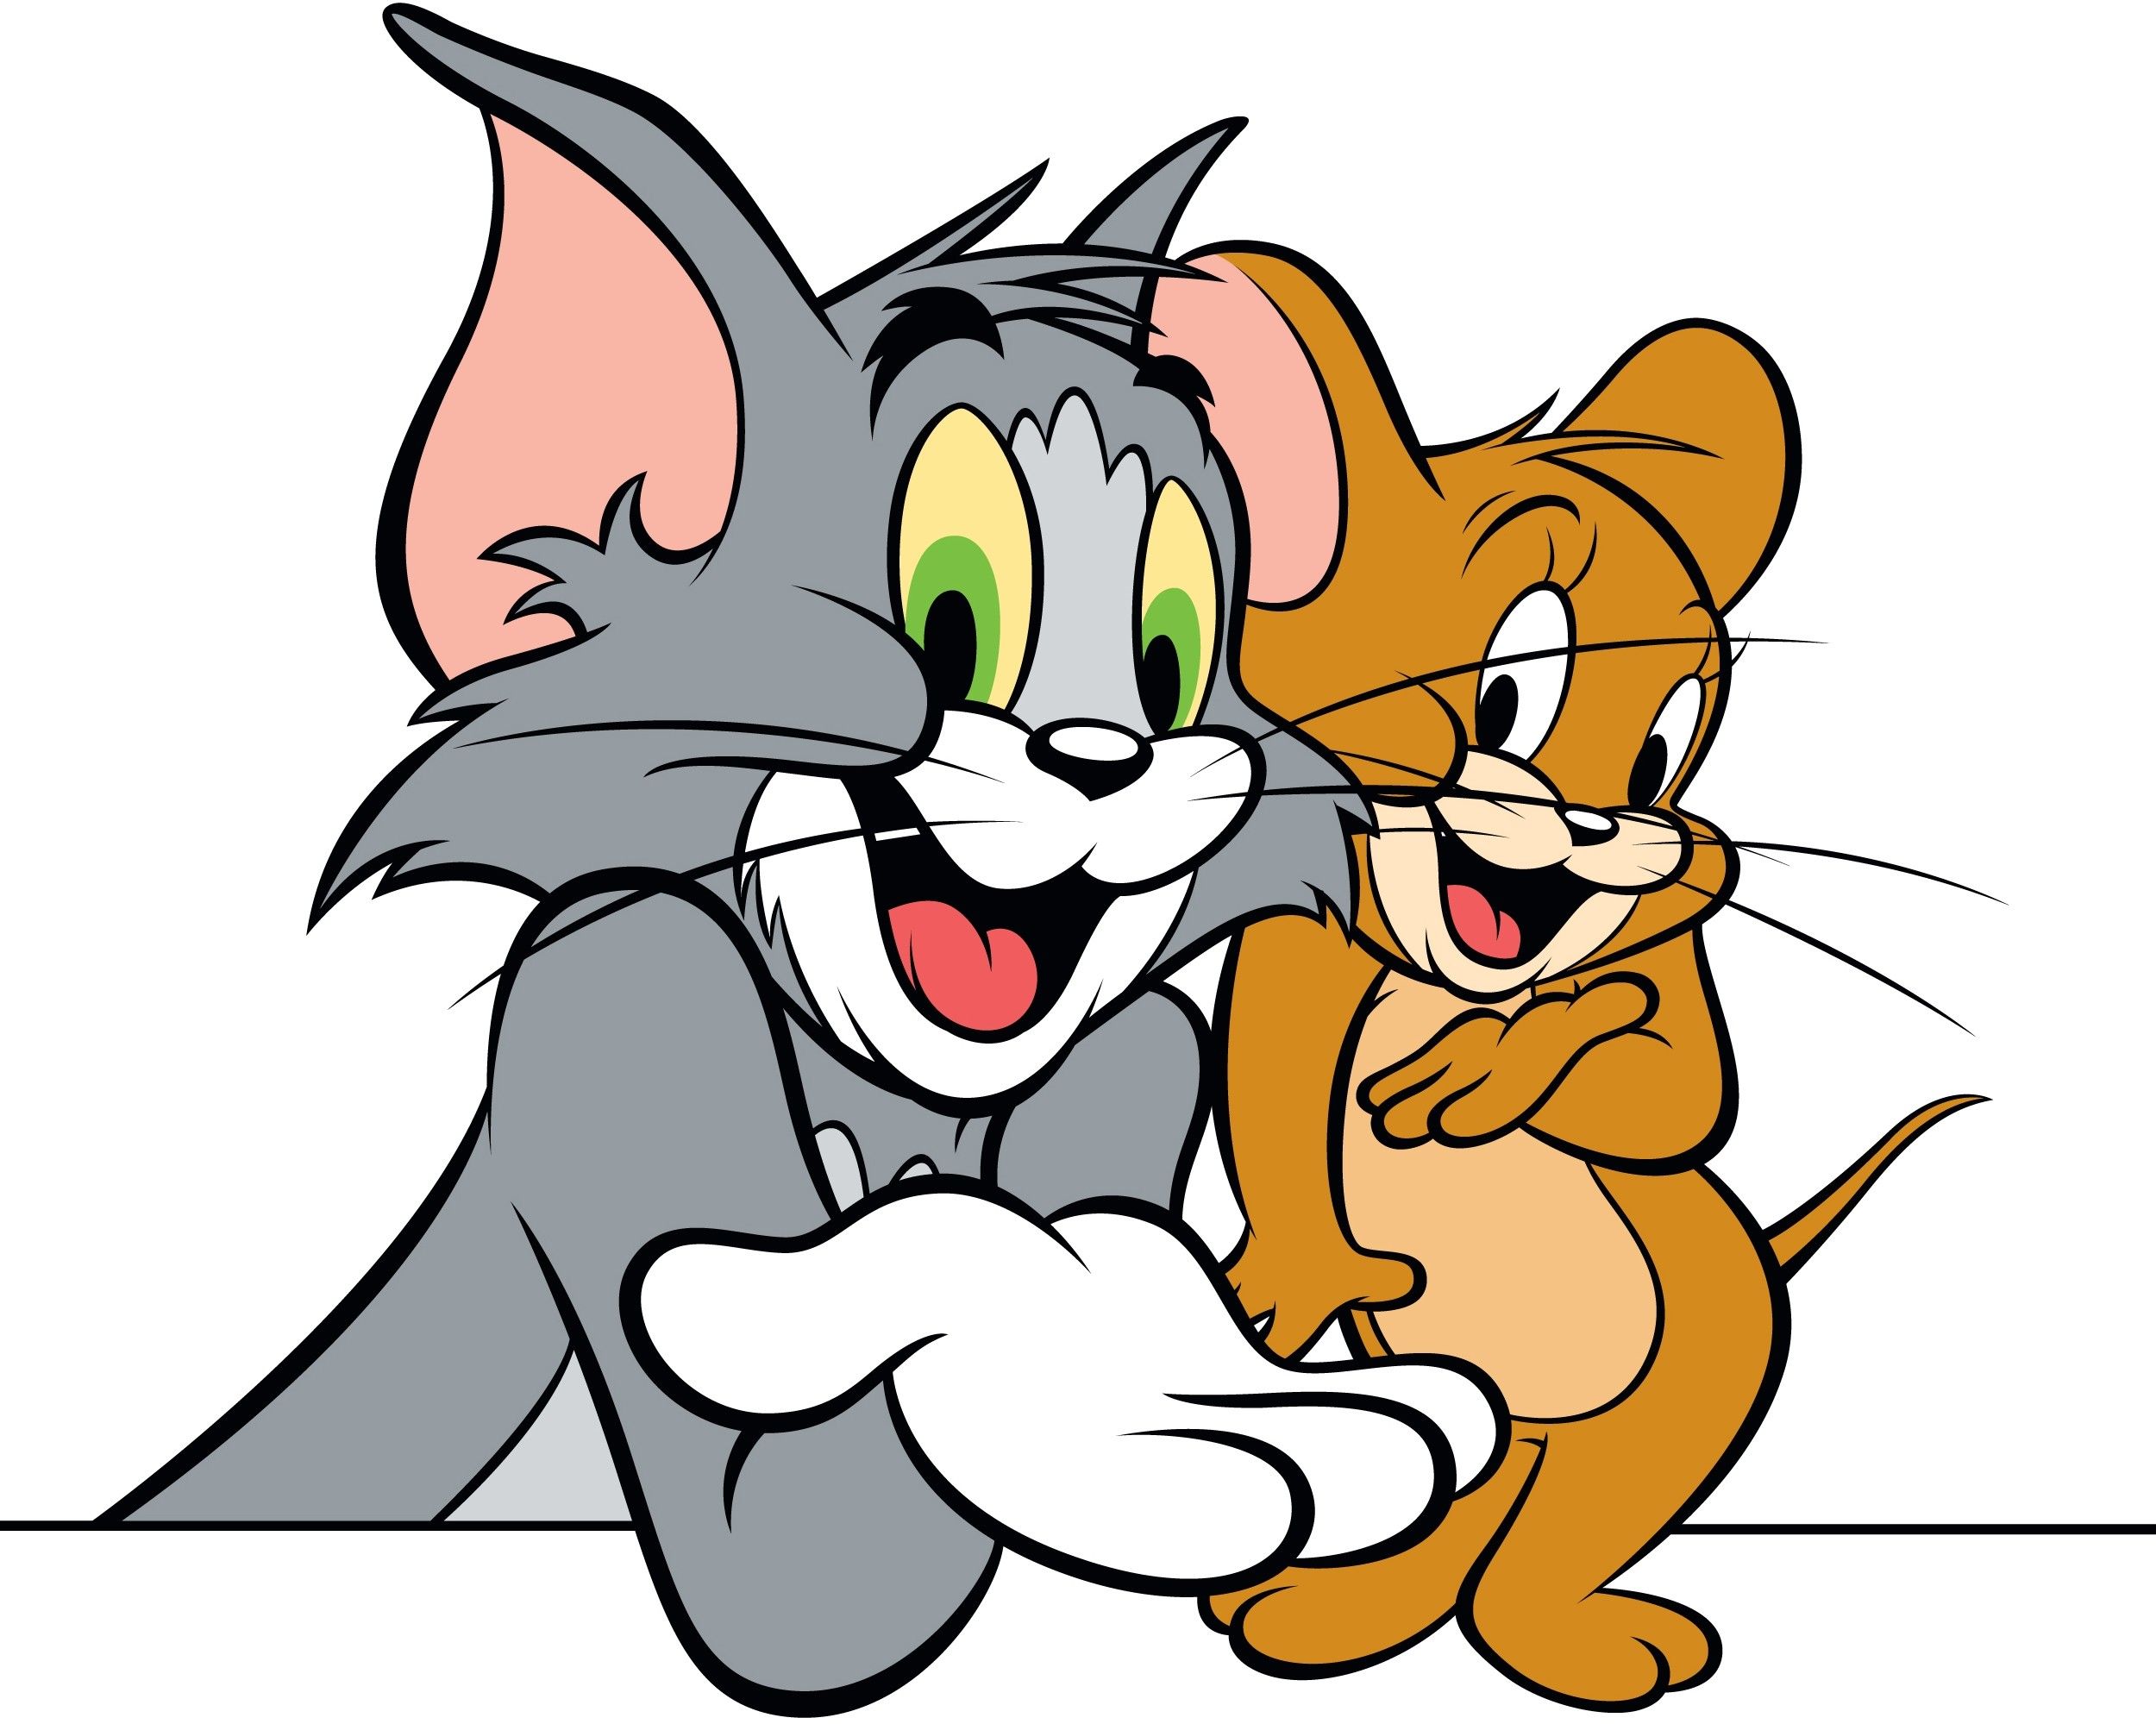 Wallpaper at Tulsa: 1080p Mobile 1080p Tom And Jerry HD Wallpaper